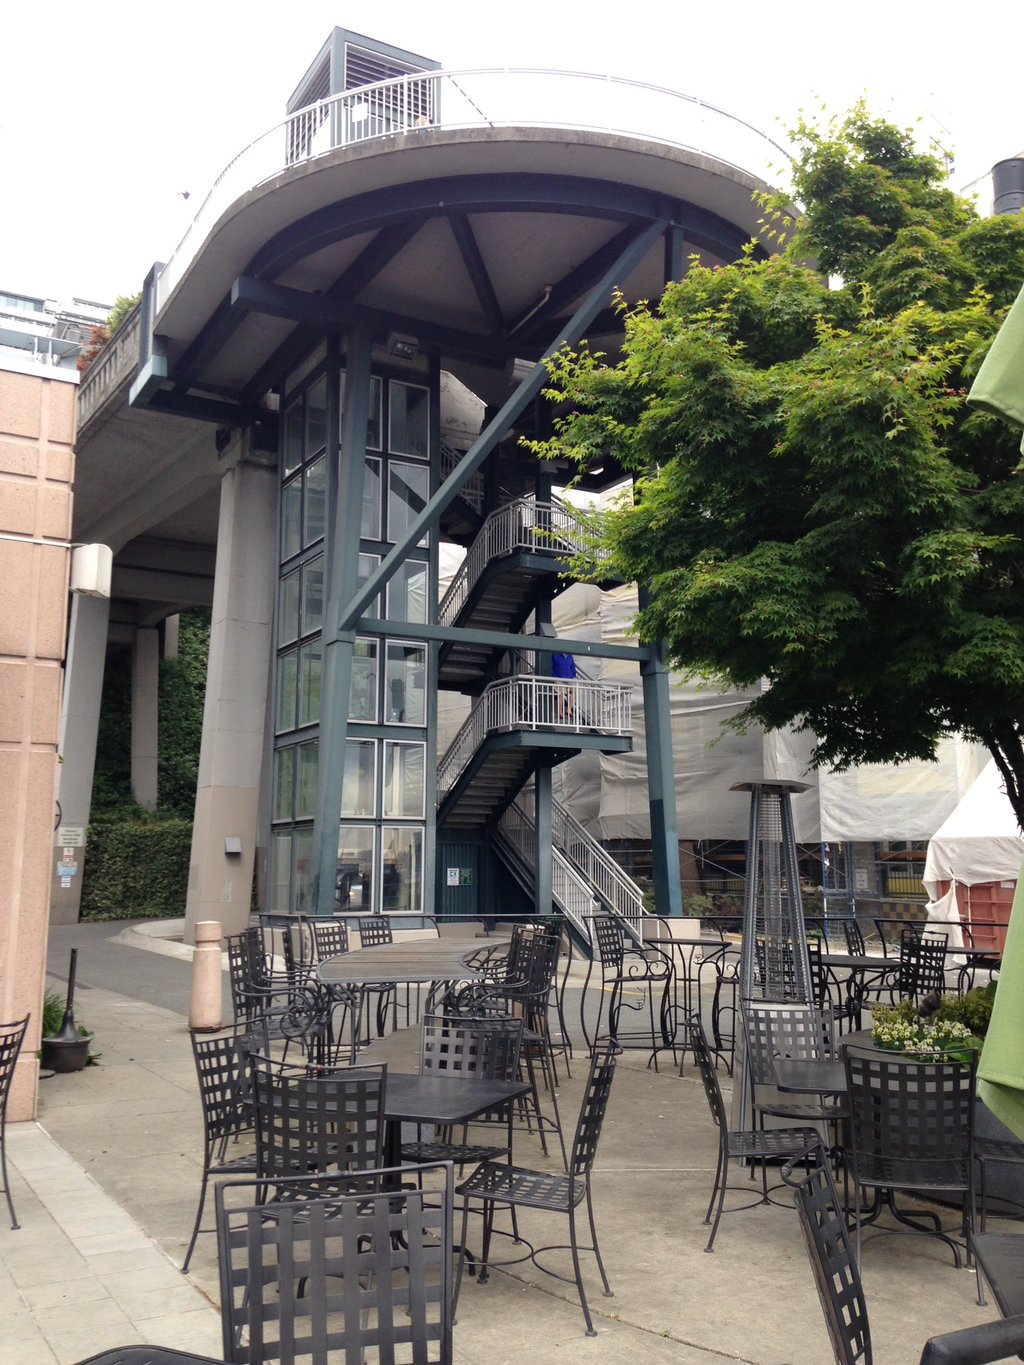 Hill Climb assist - elevator and stairway - access from Lenora to the Seattle Waterfront.